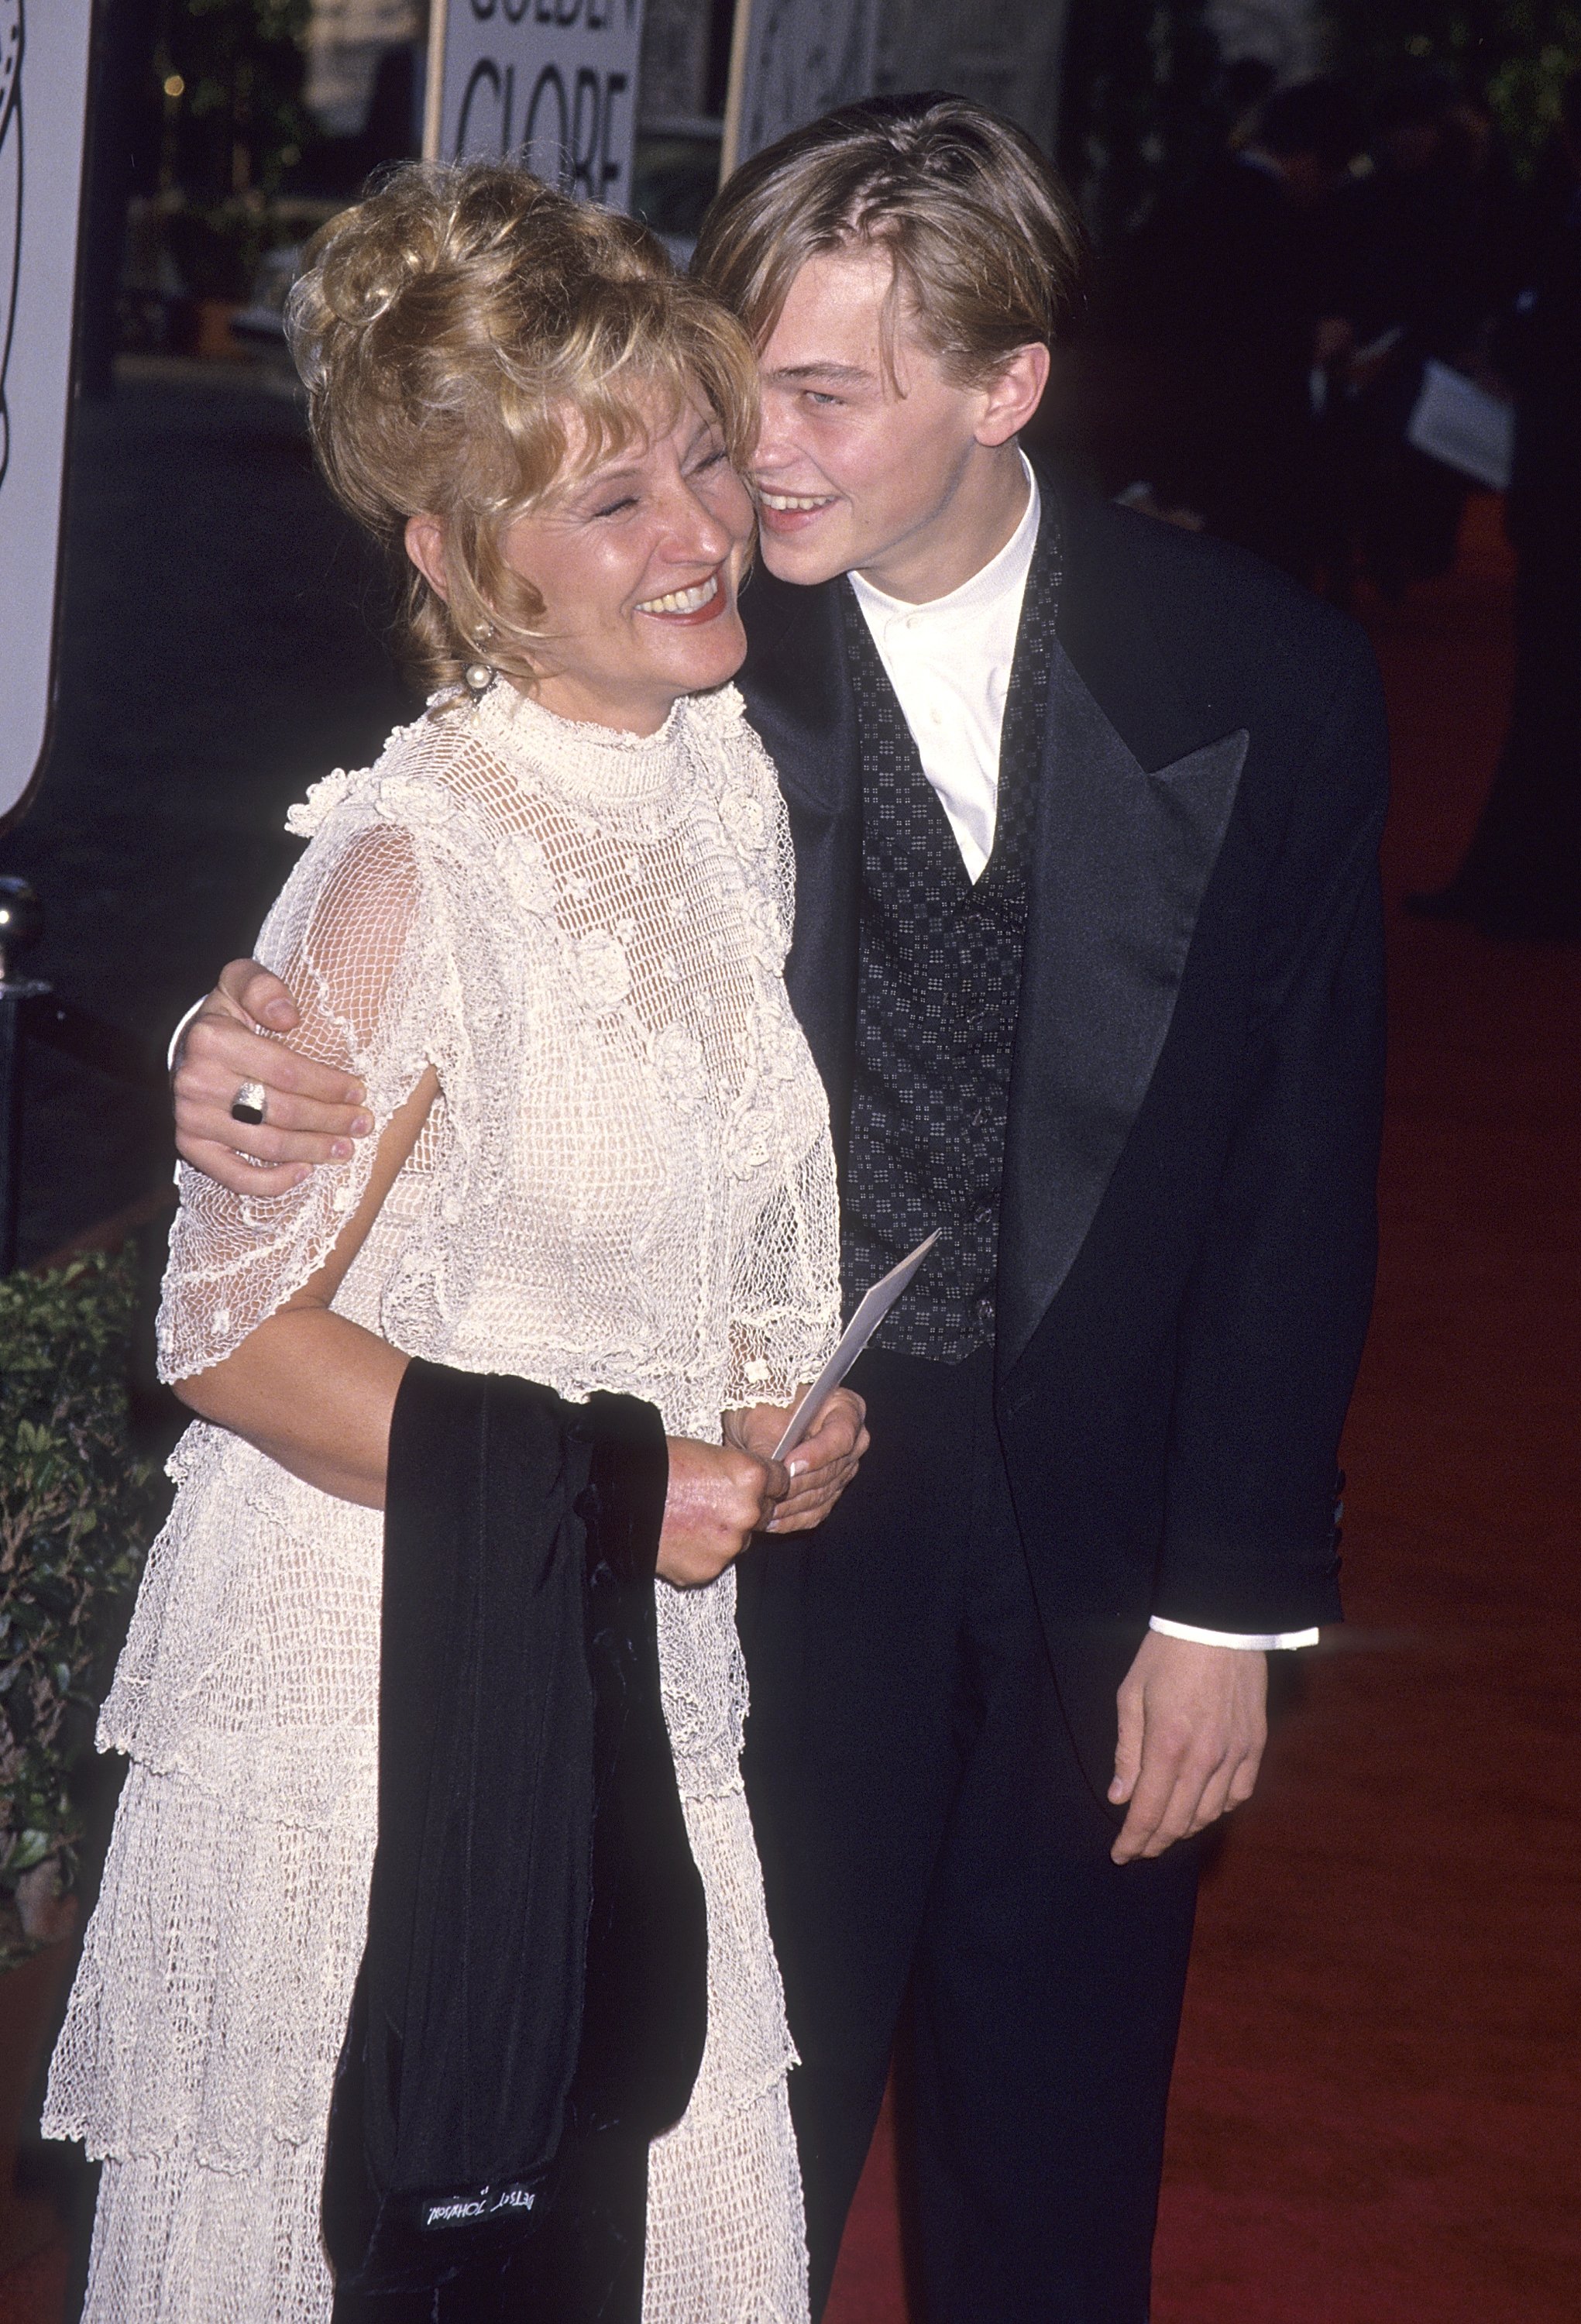 Leonardo DiCaprio and mother Irmelin Indenbirken attend the 51st Annual Golden Globe Awards on January 22, 1994 at the Beverly Hilton Hotel in Beverly Hills, California | Source: Getty Images